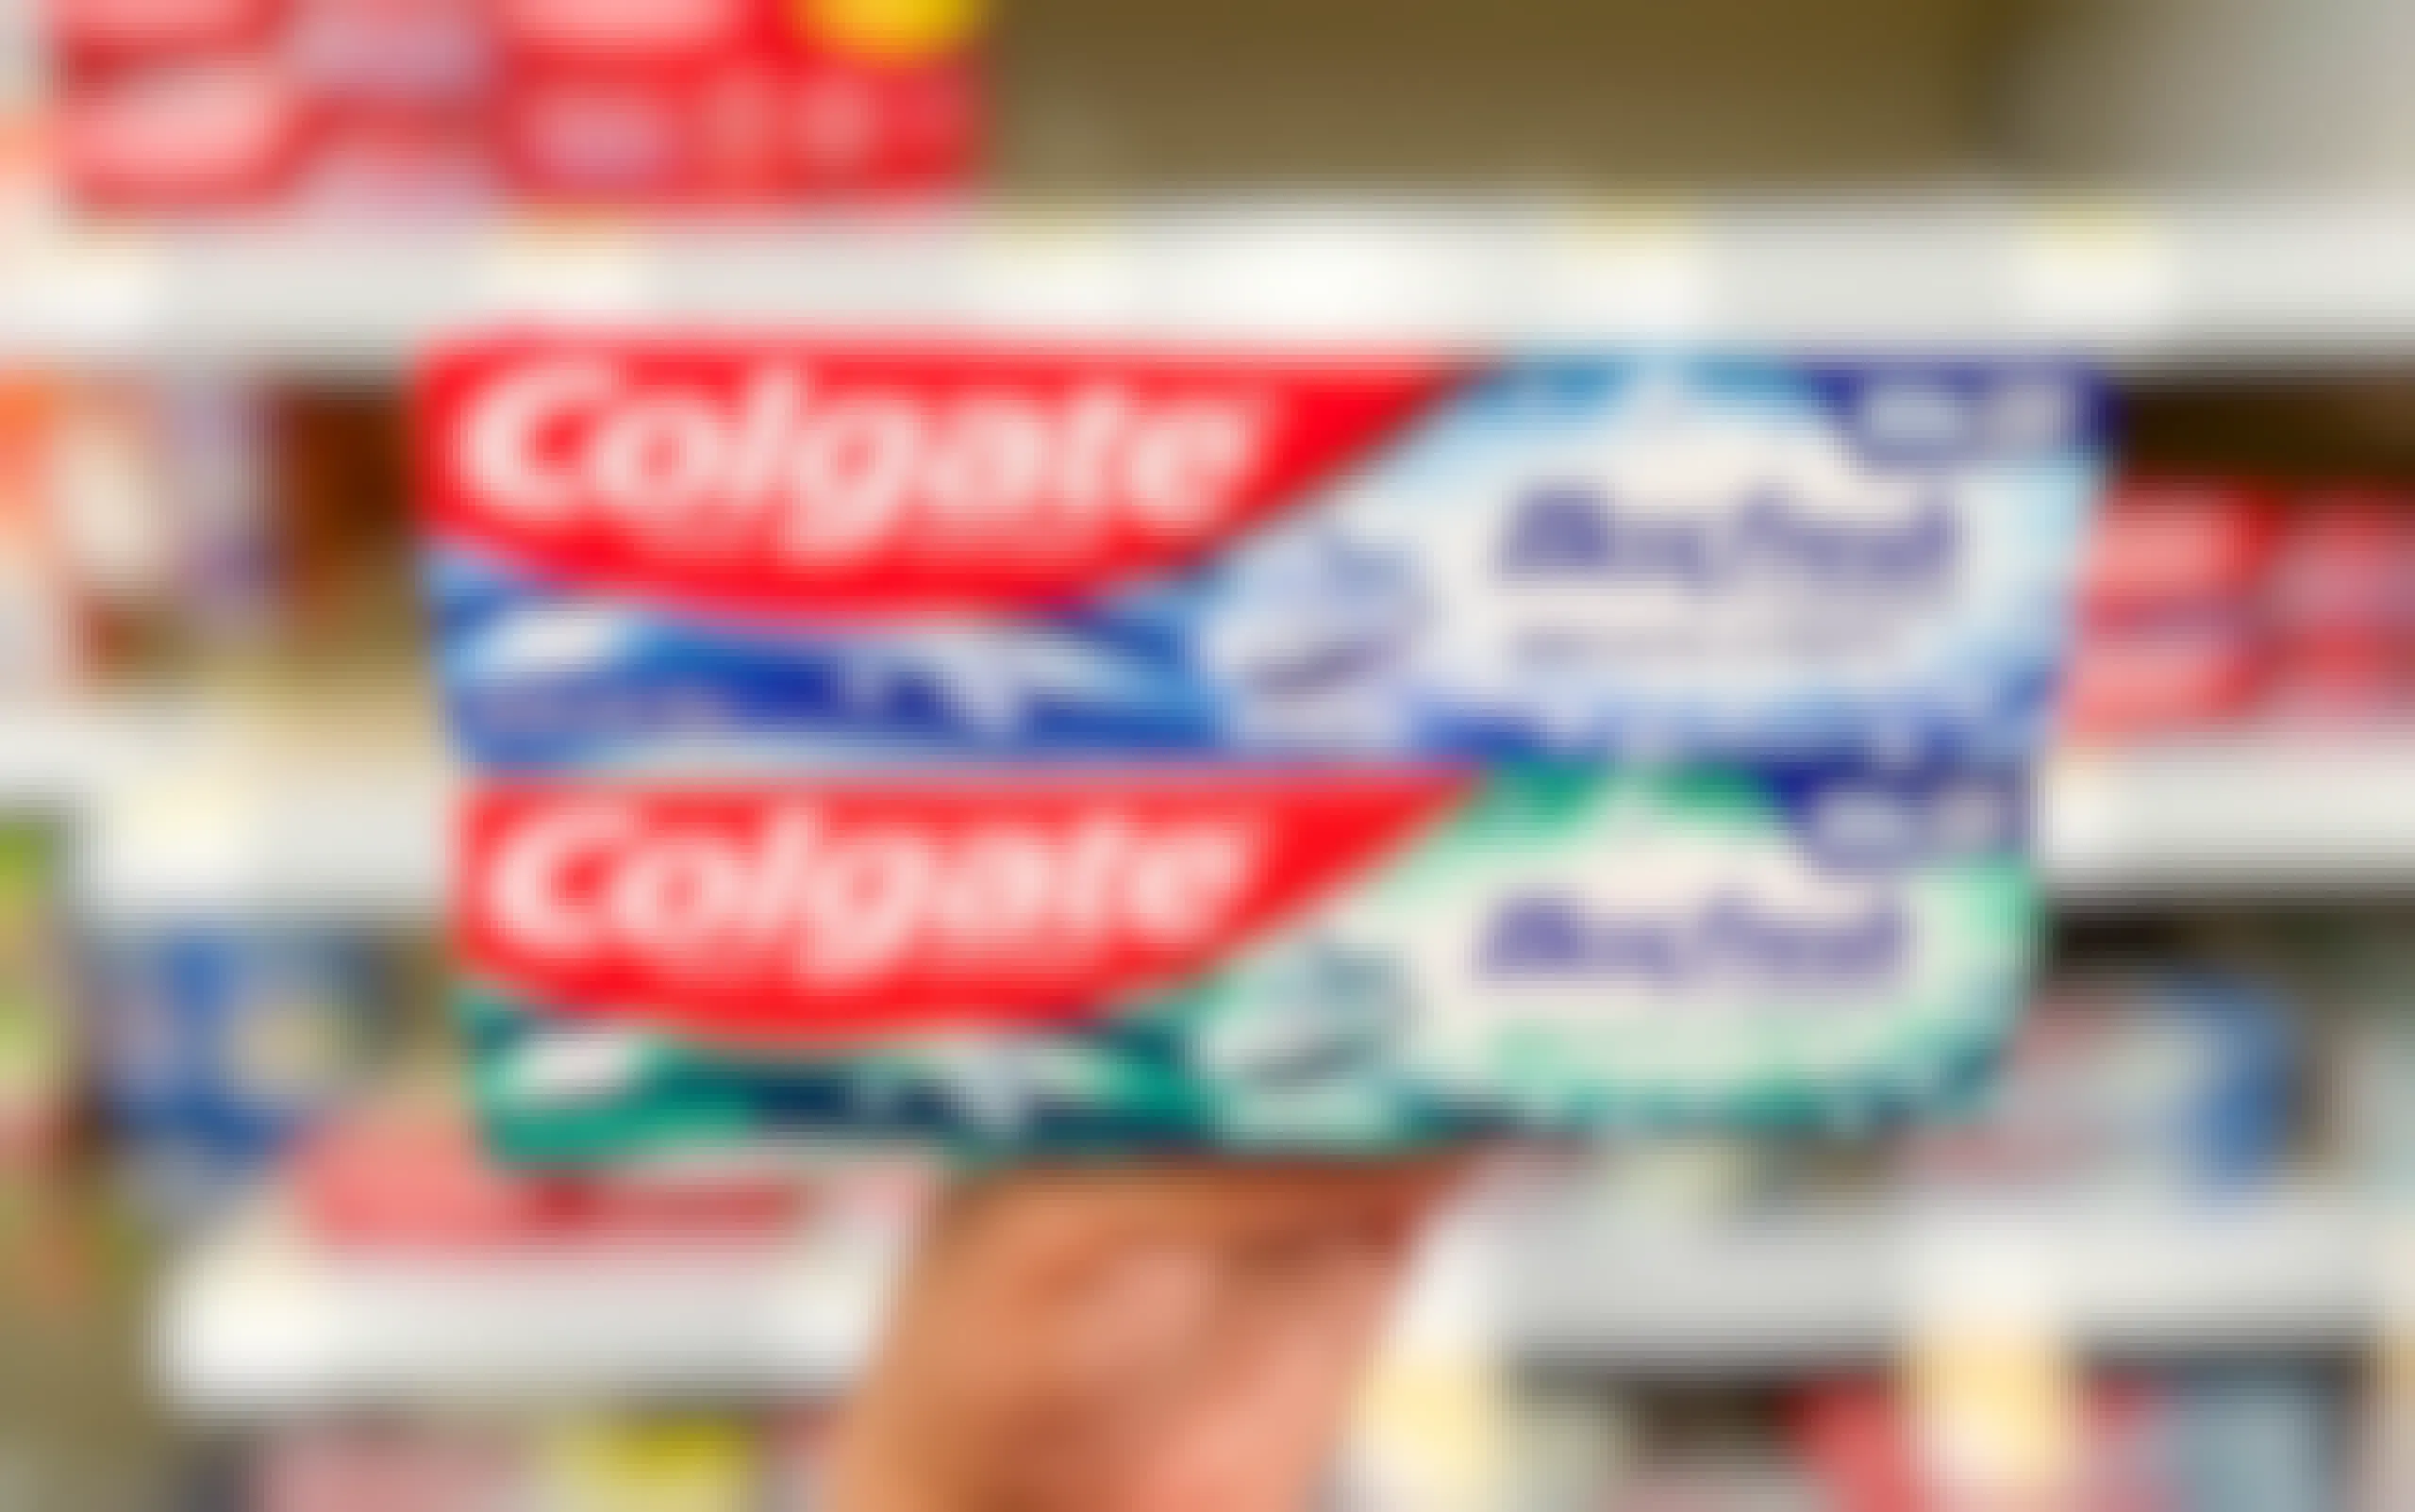 Hand holding two boxes of Colgate Maxfresh toothpaste in aisle